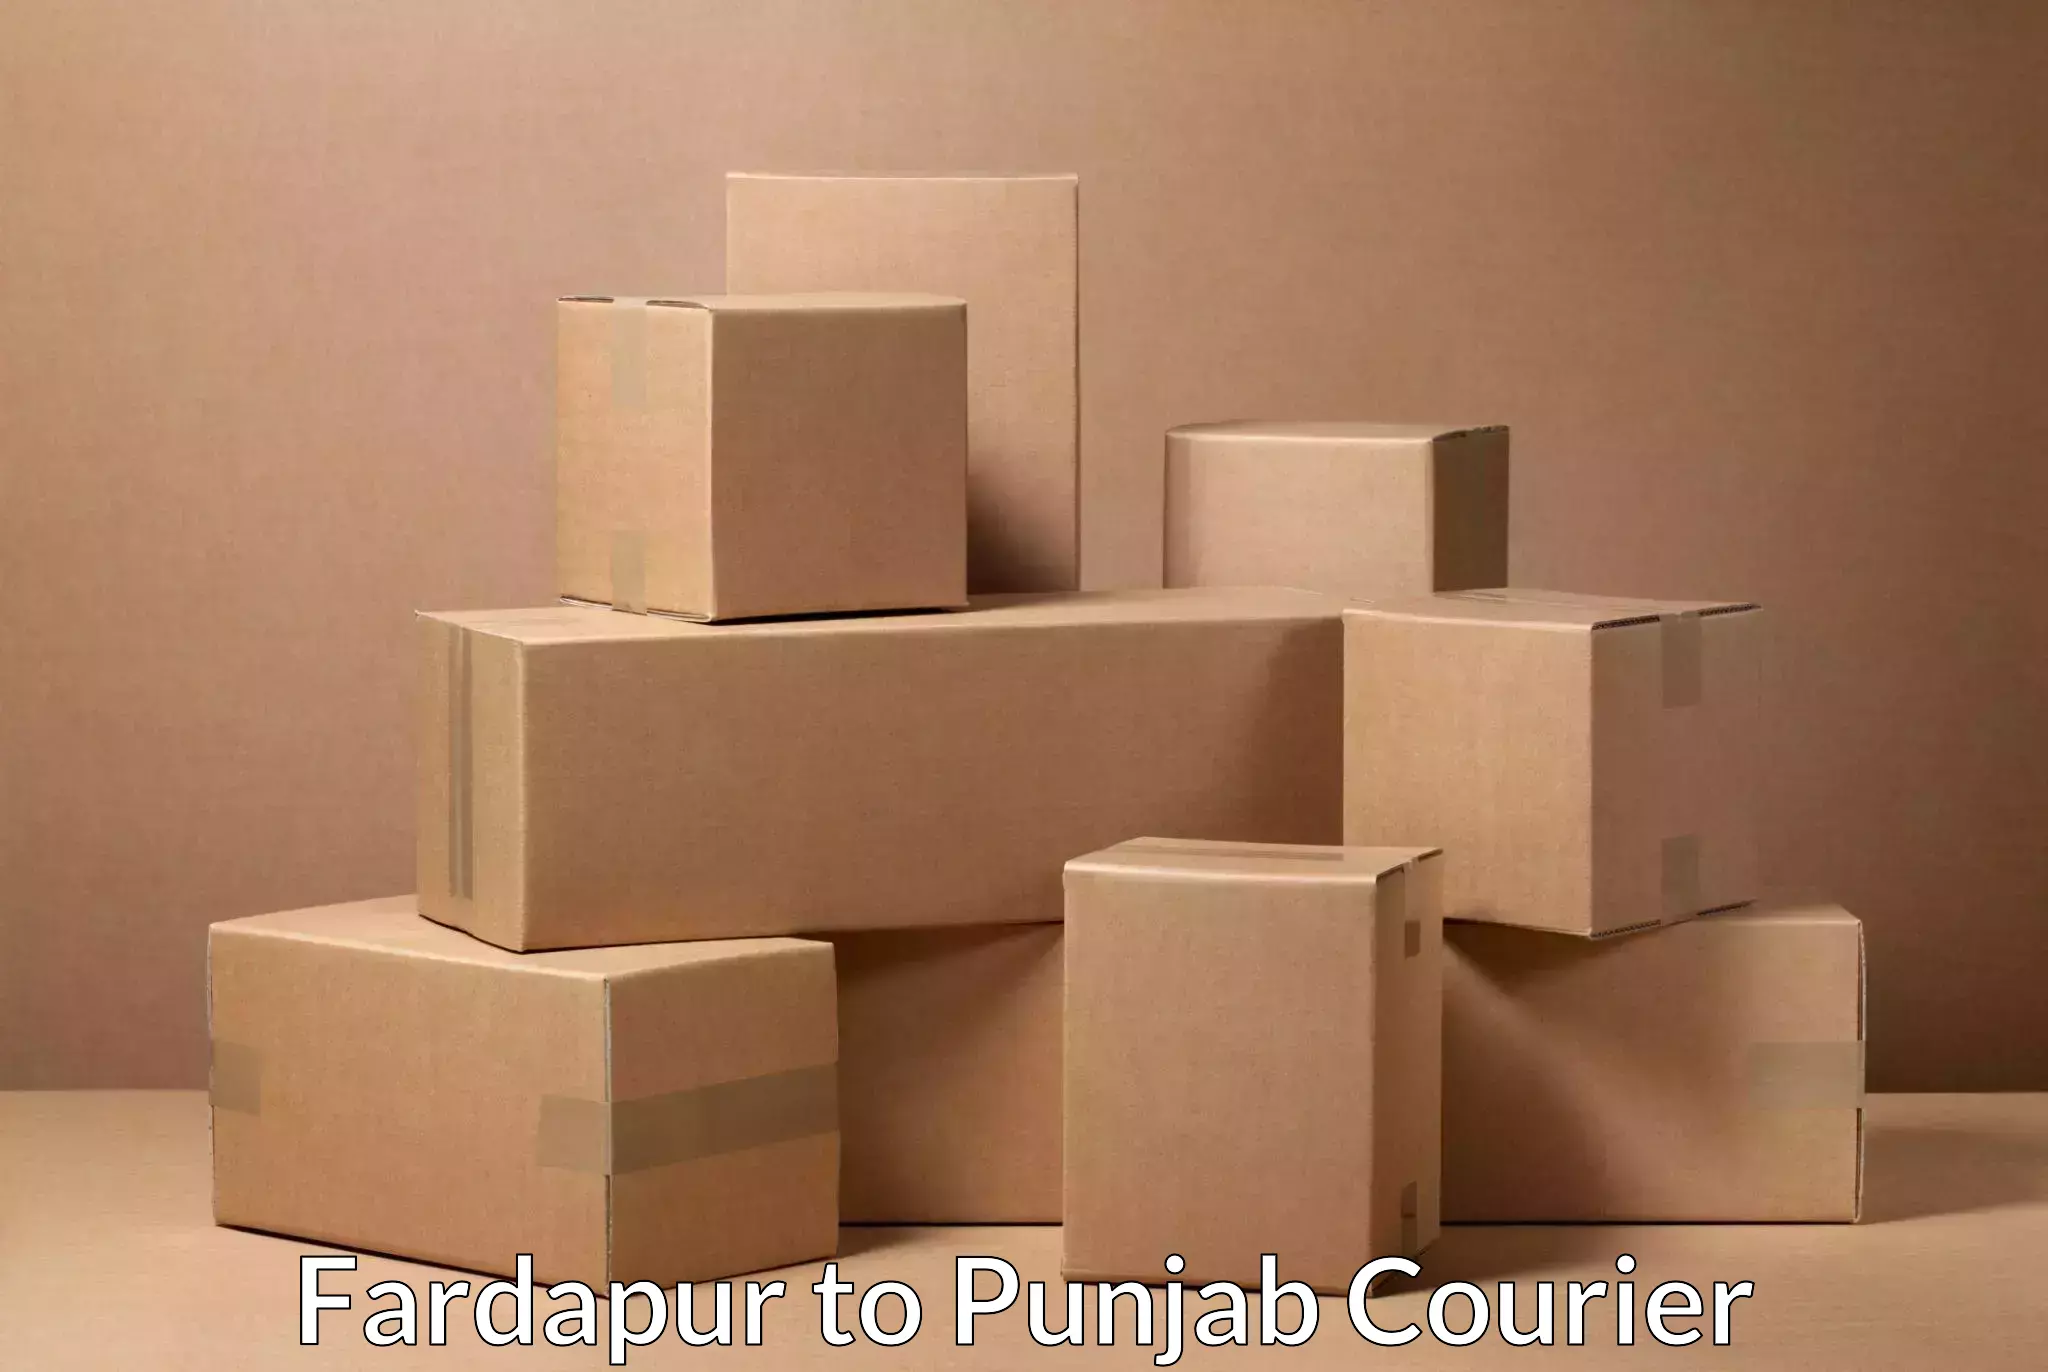 State-of-the-art courier technology Fardapur to Abohar